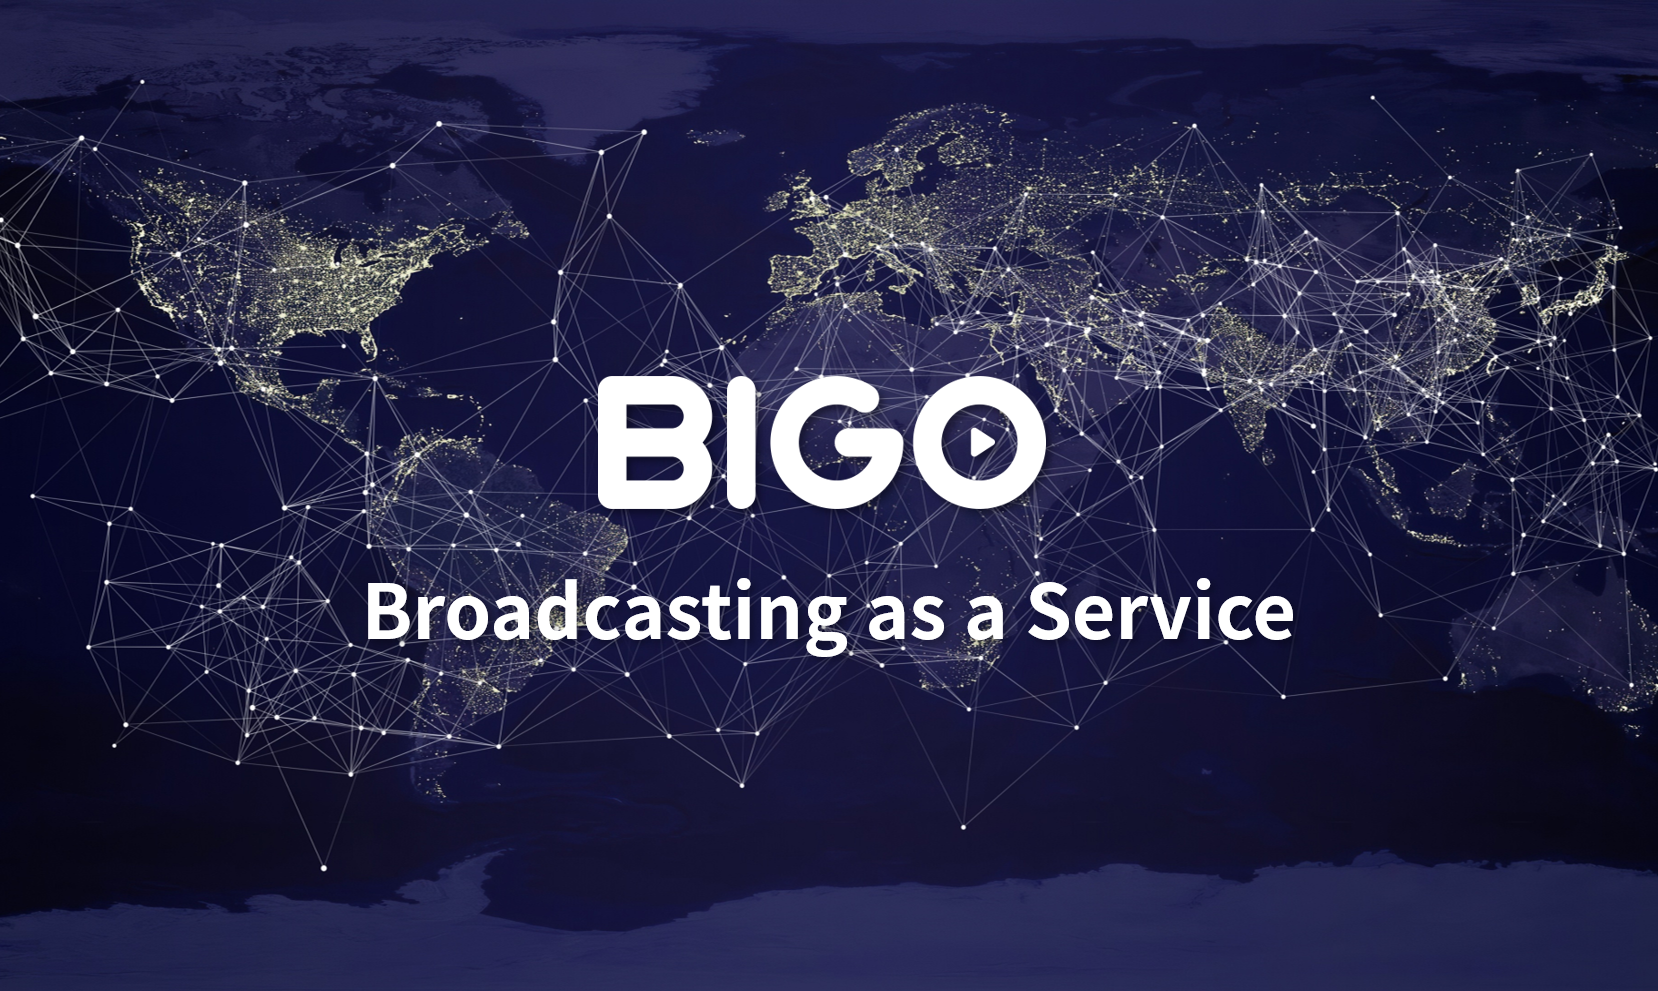 BIGO, part of Chinese live-streamer YY, wants to sell “Broadcasting as a Service”